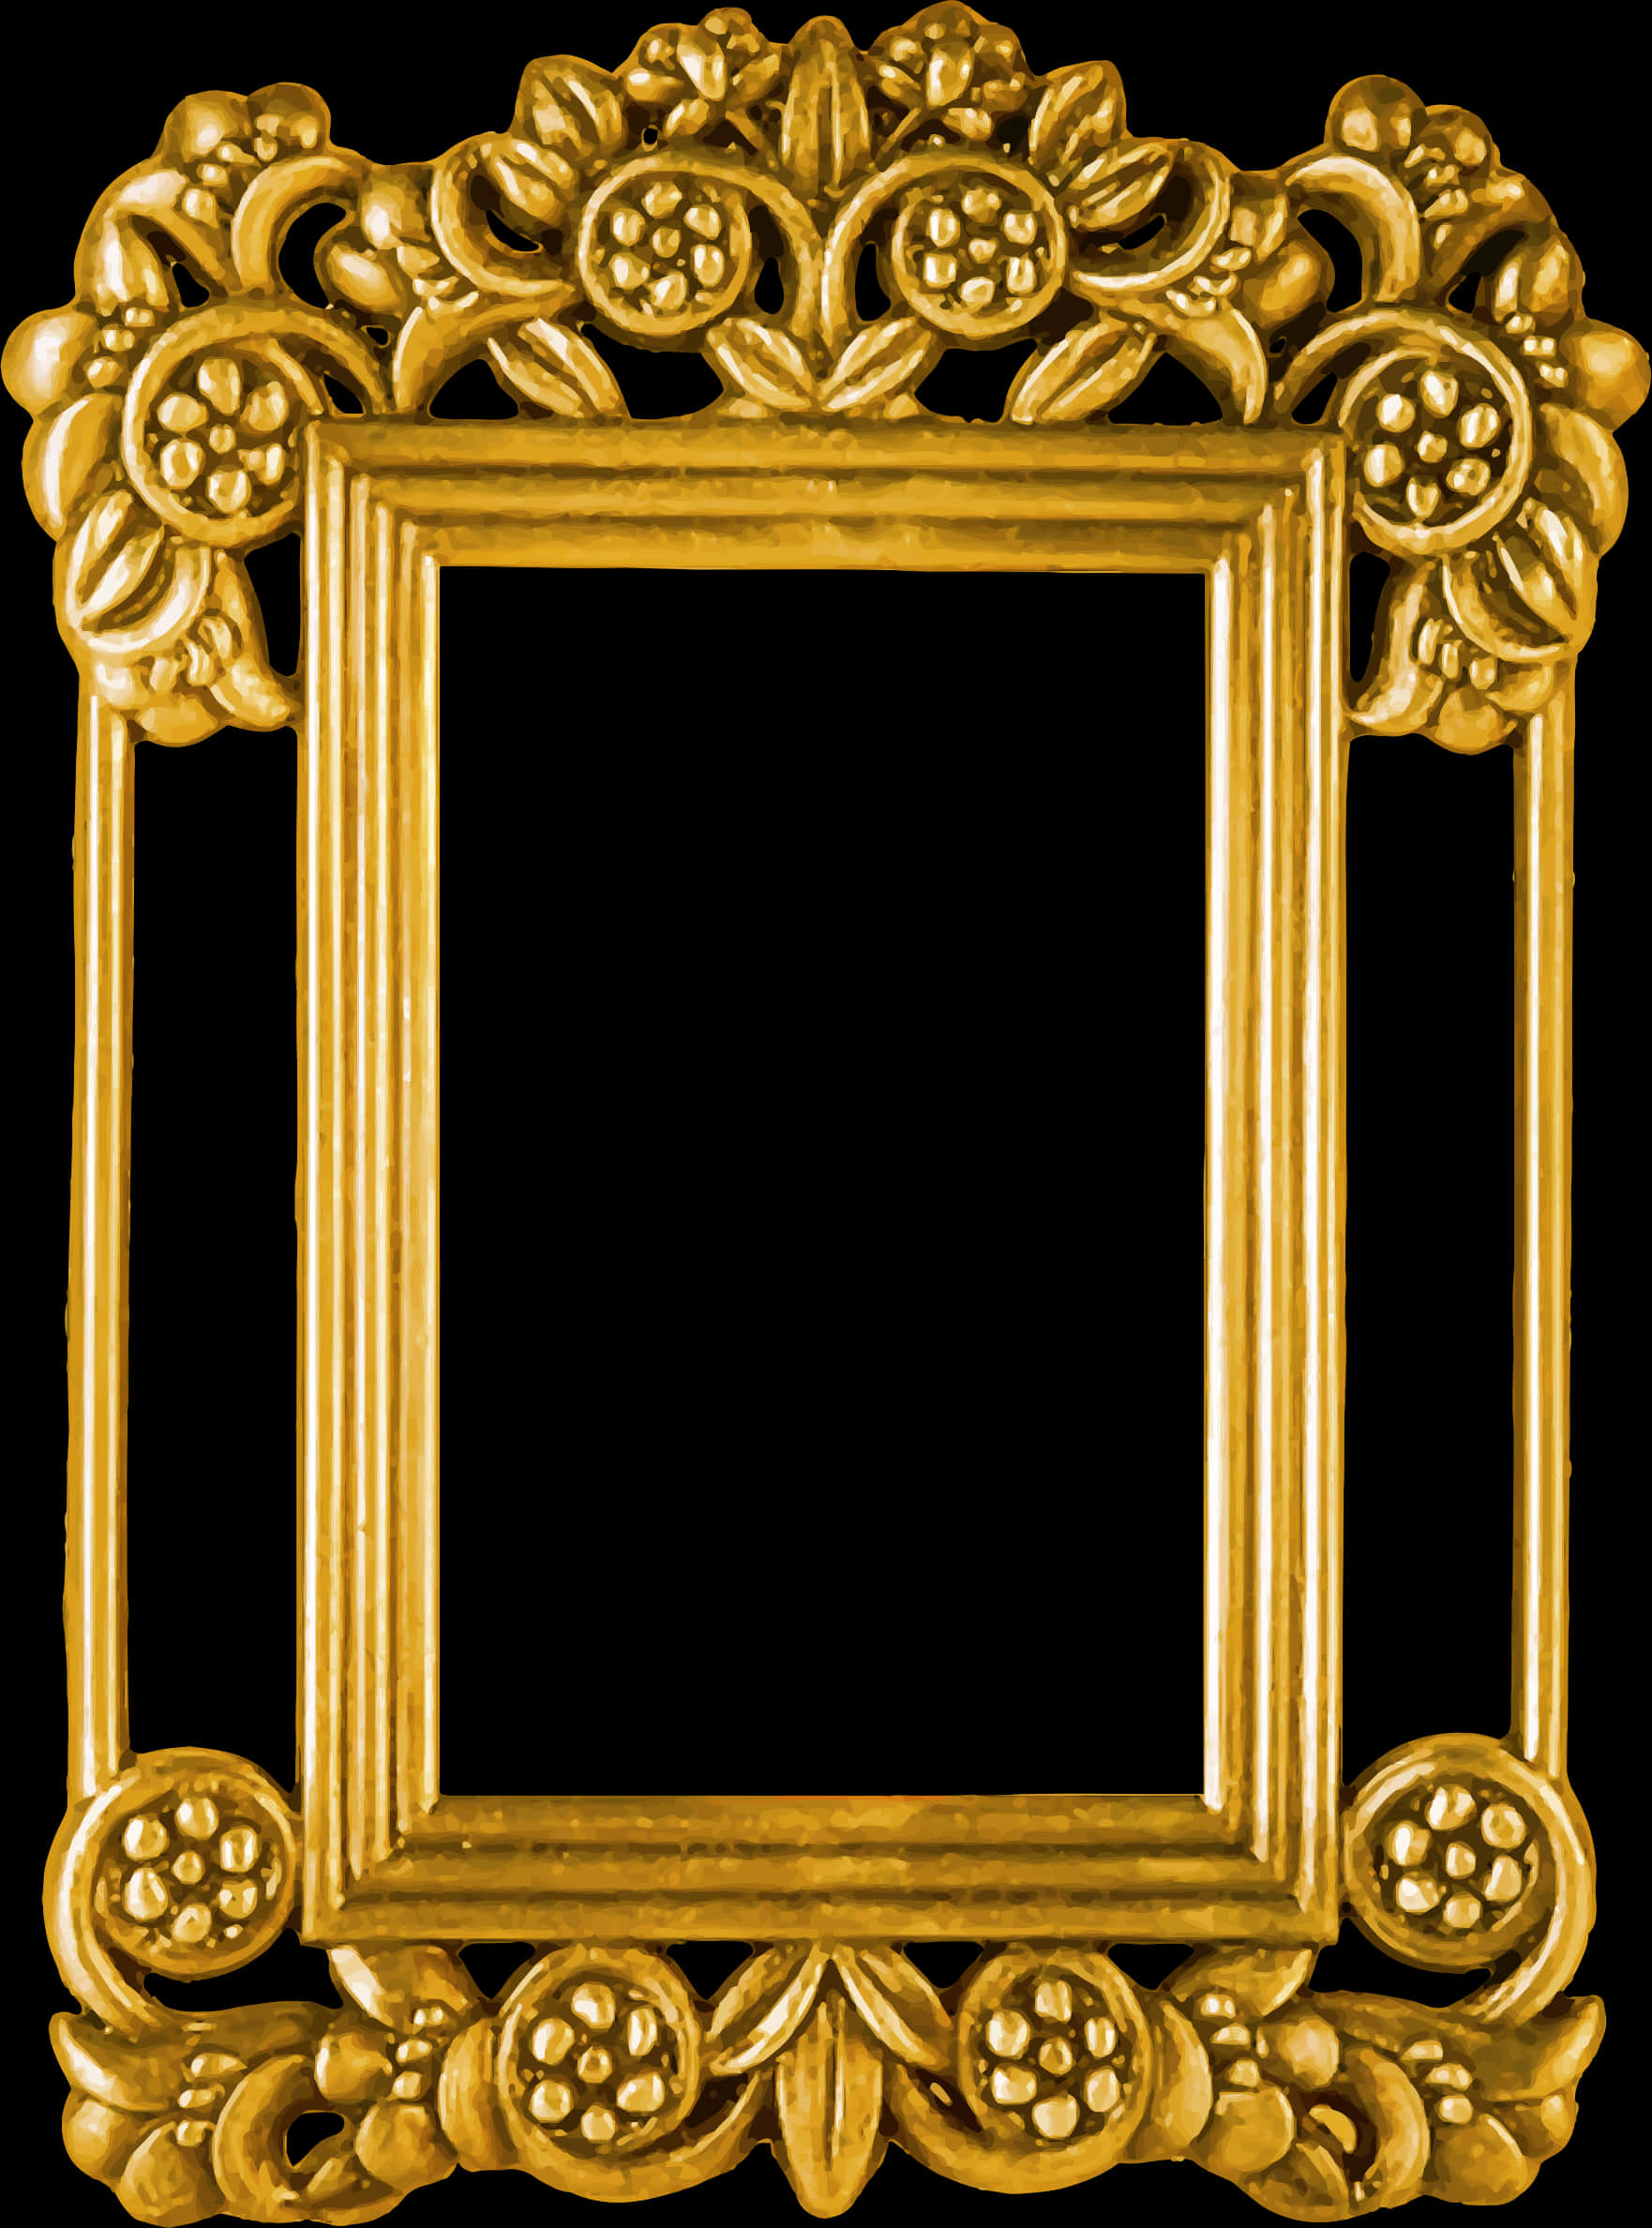 A Gold Frame With Flowers On It